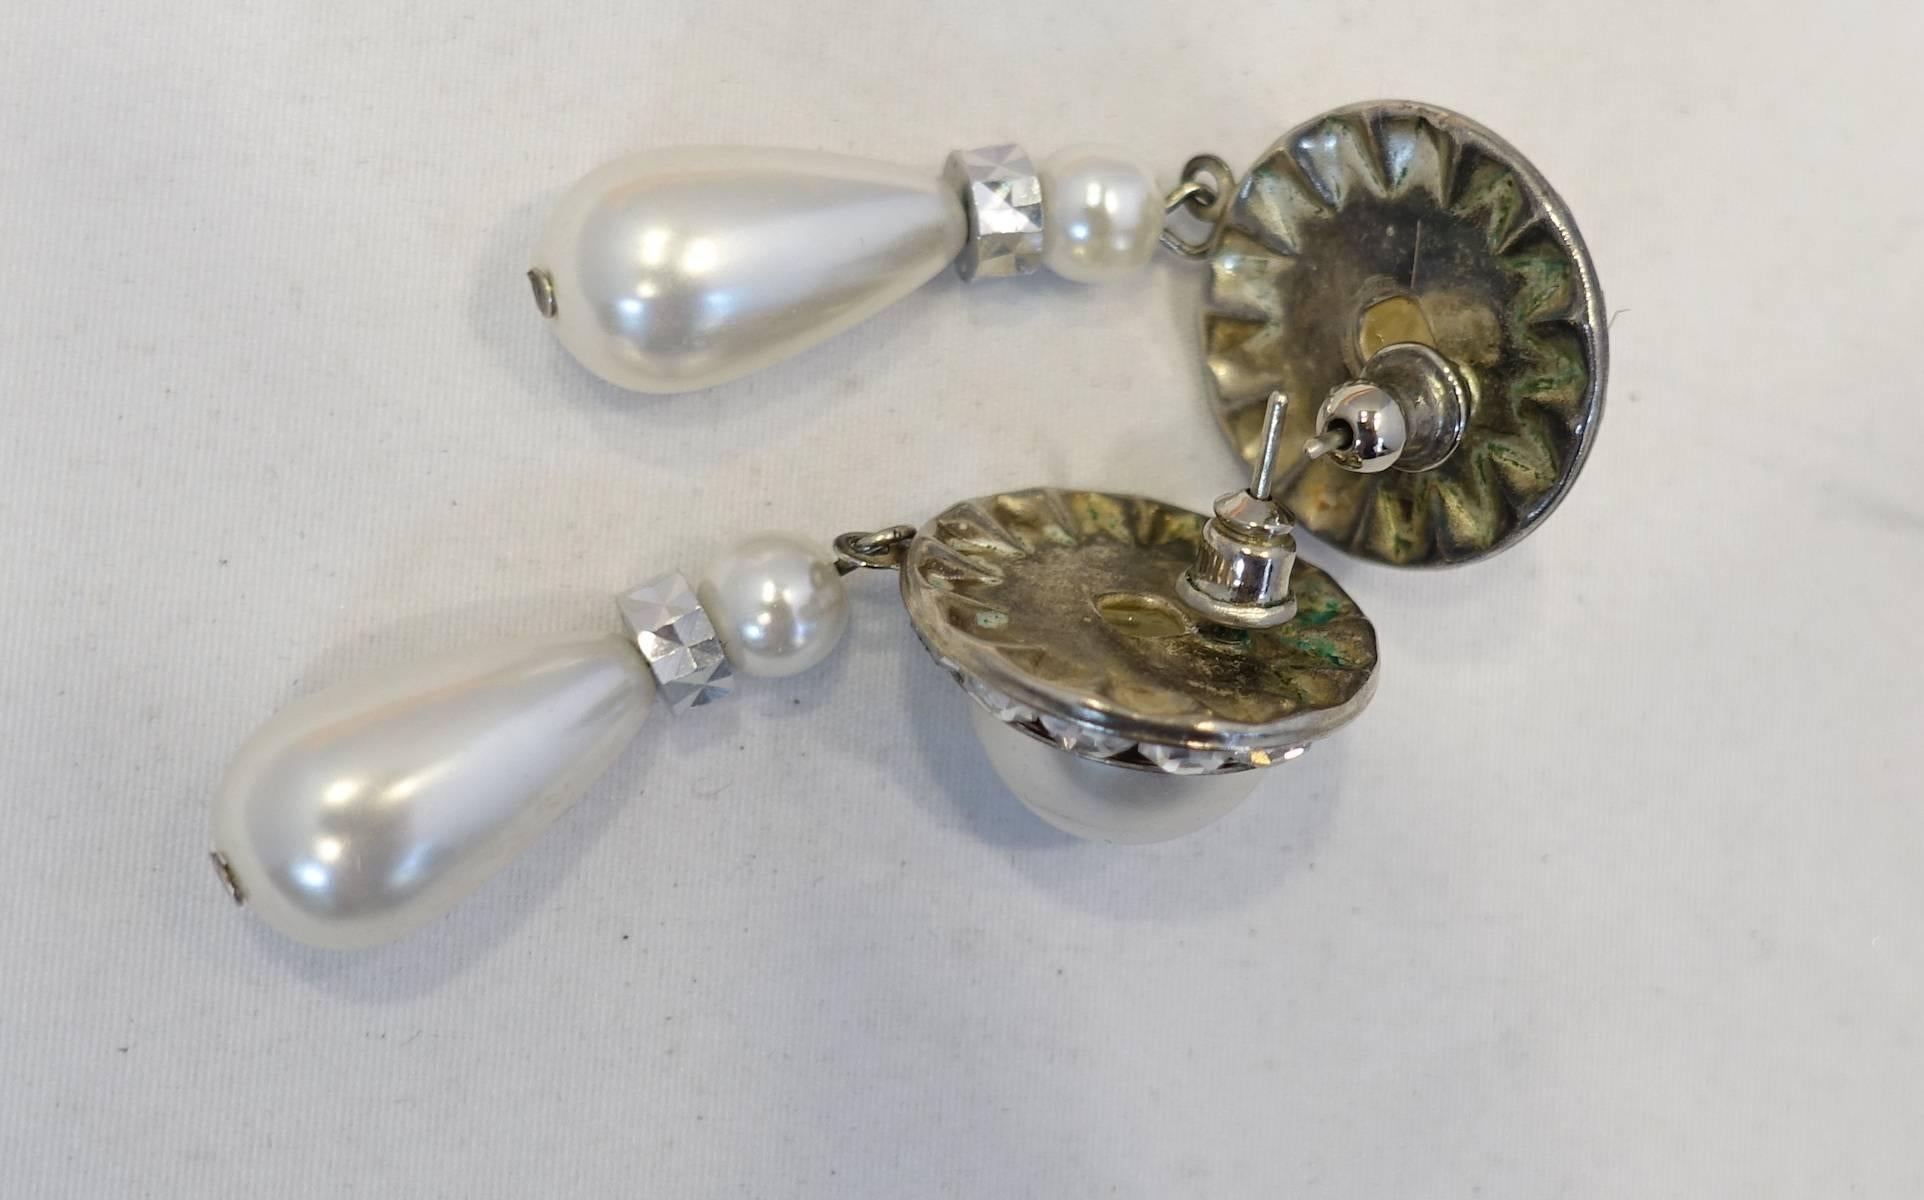 These classic earrings are designed with faux pearls and clear crystal accents in a silver tone setting.  These pierced earrings measure 2” x 3/4” and are in excellent condition.